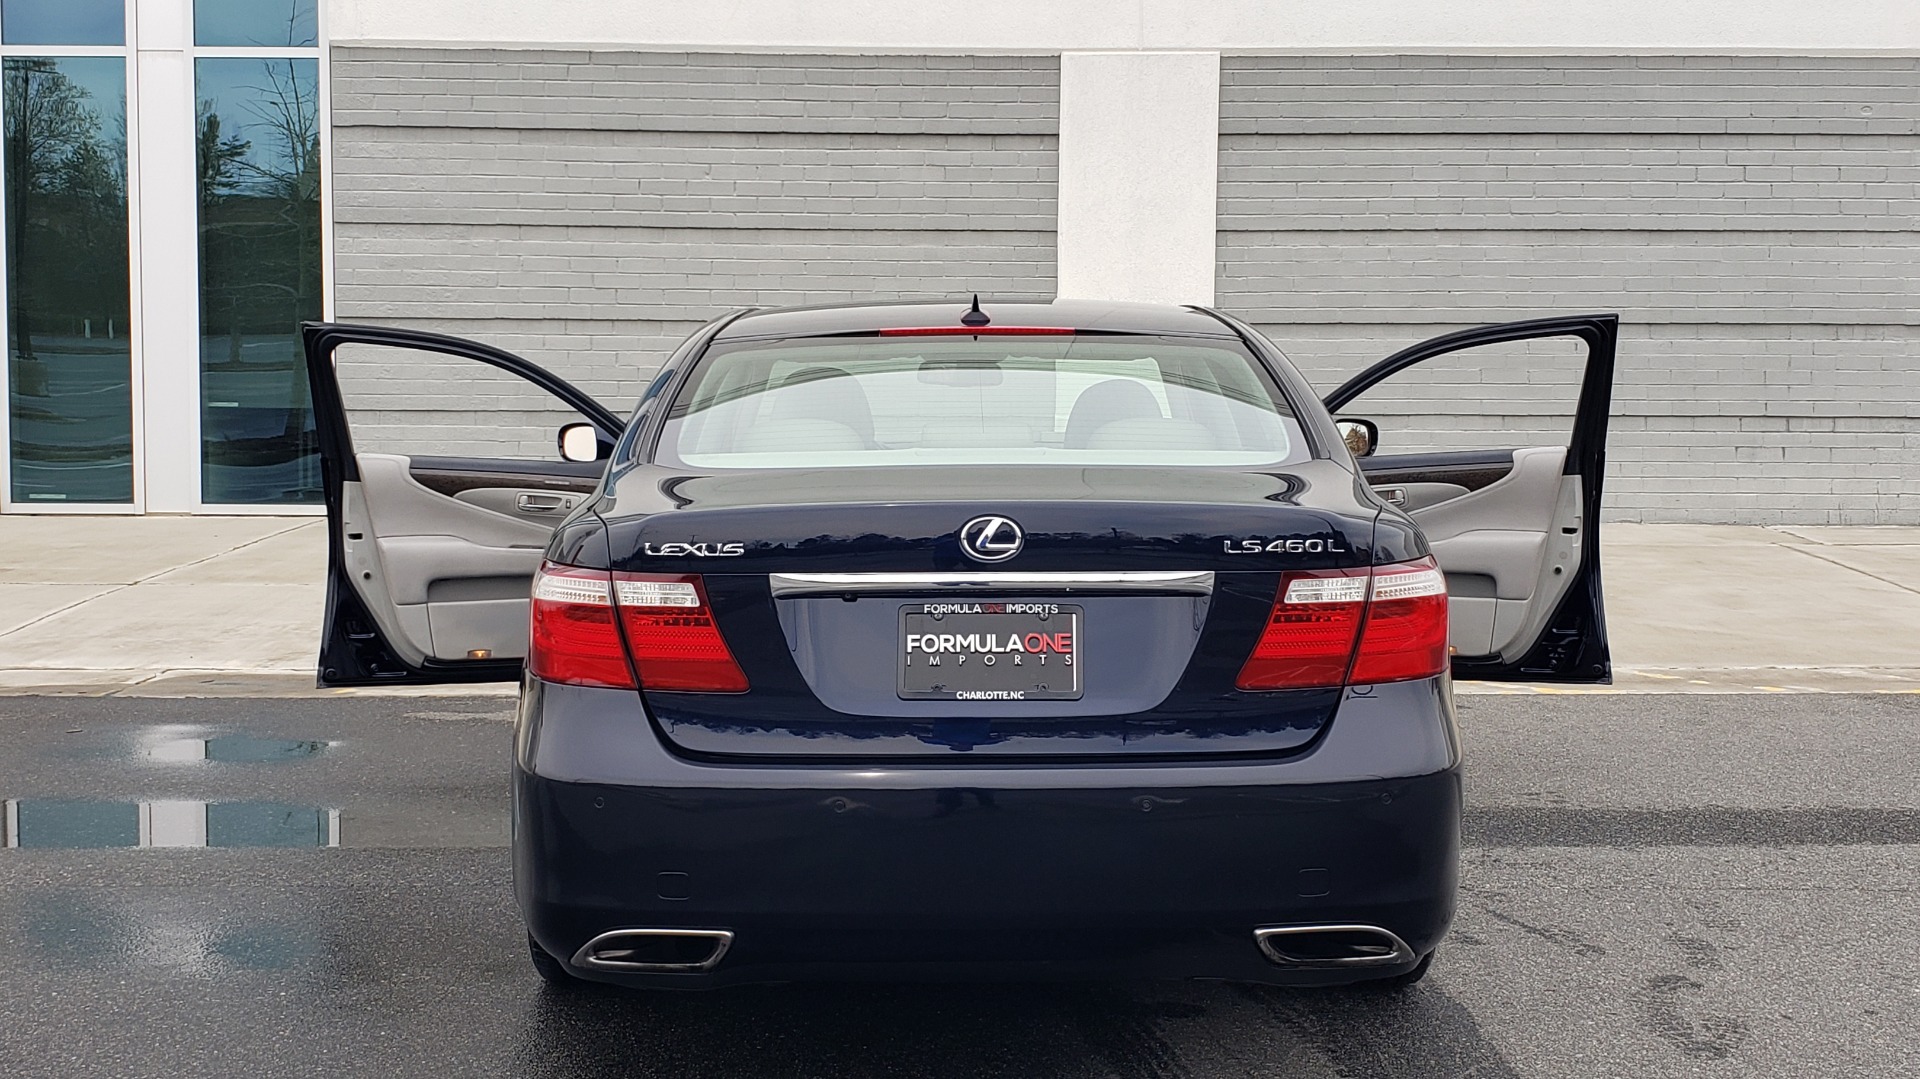 Used 2008 Lexus LS 460 LWB LUXURY SEDAN / MARK LEVINSON / INT PARK ASST / REARVIEW for sale Sold at Formula Imports in Charlotte NC 28227 22